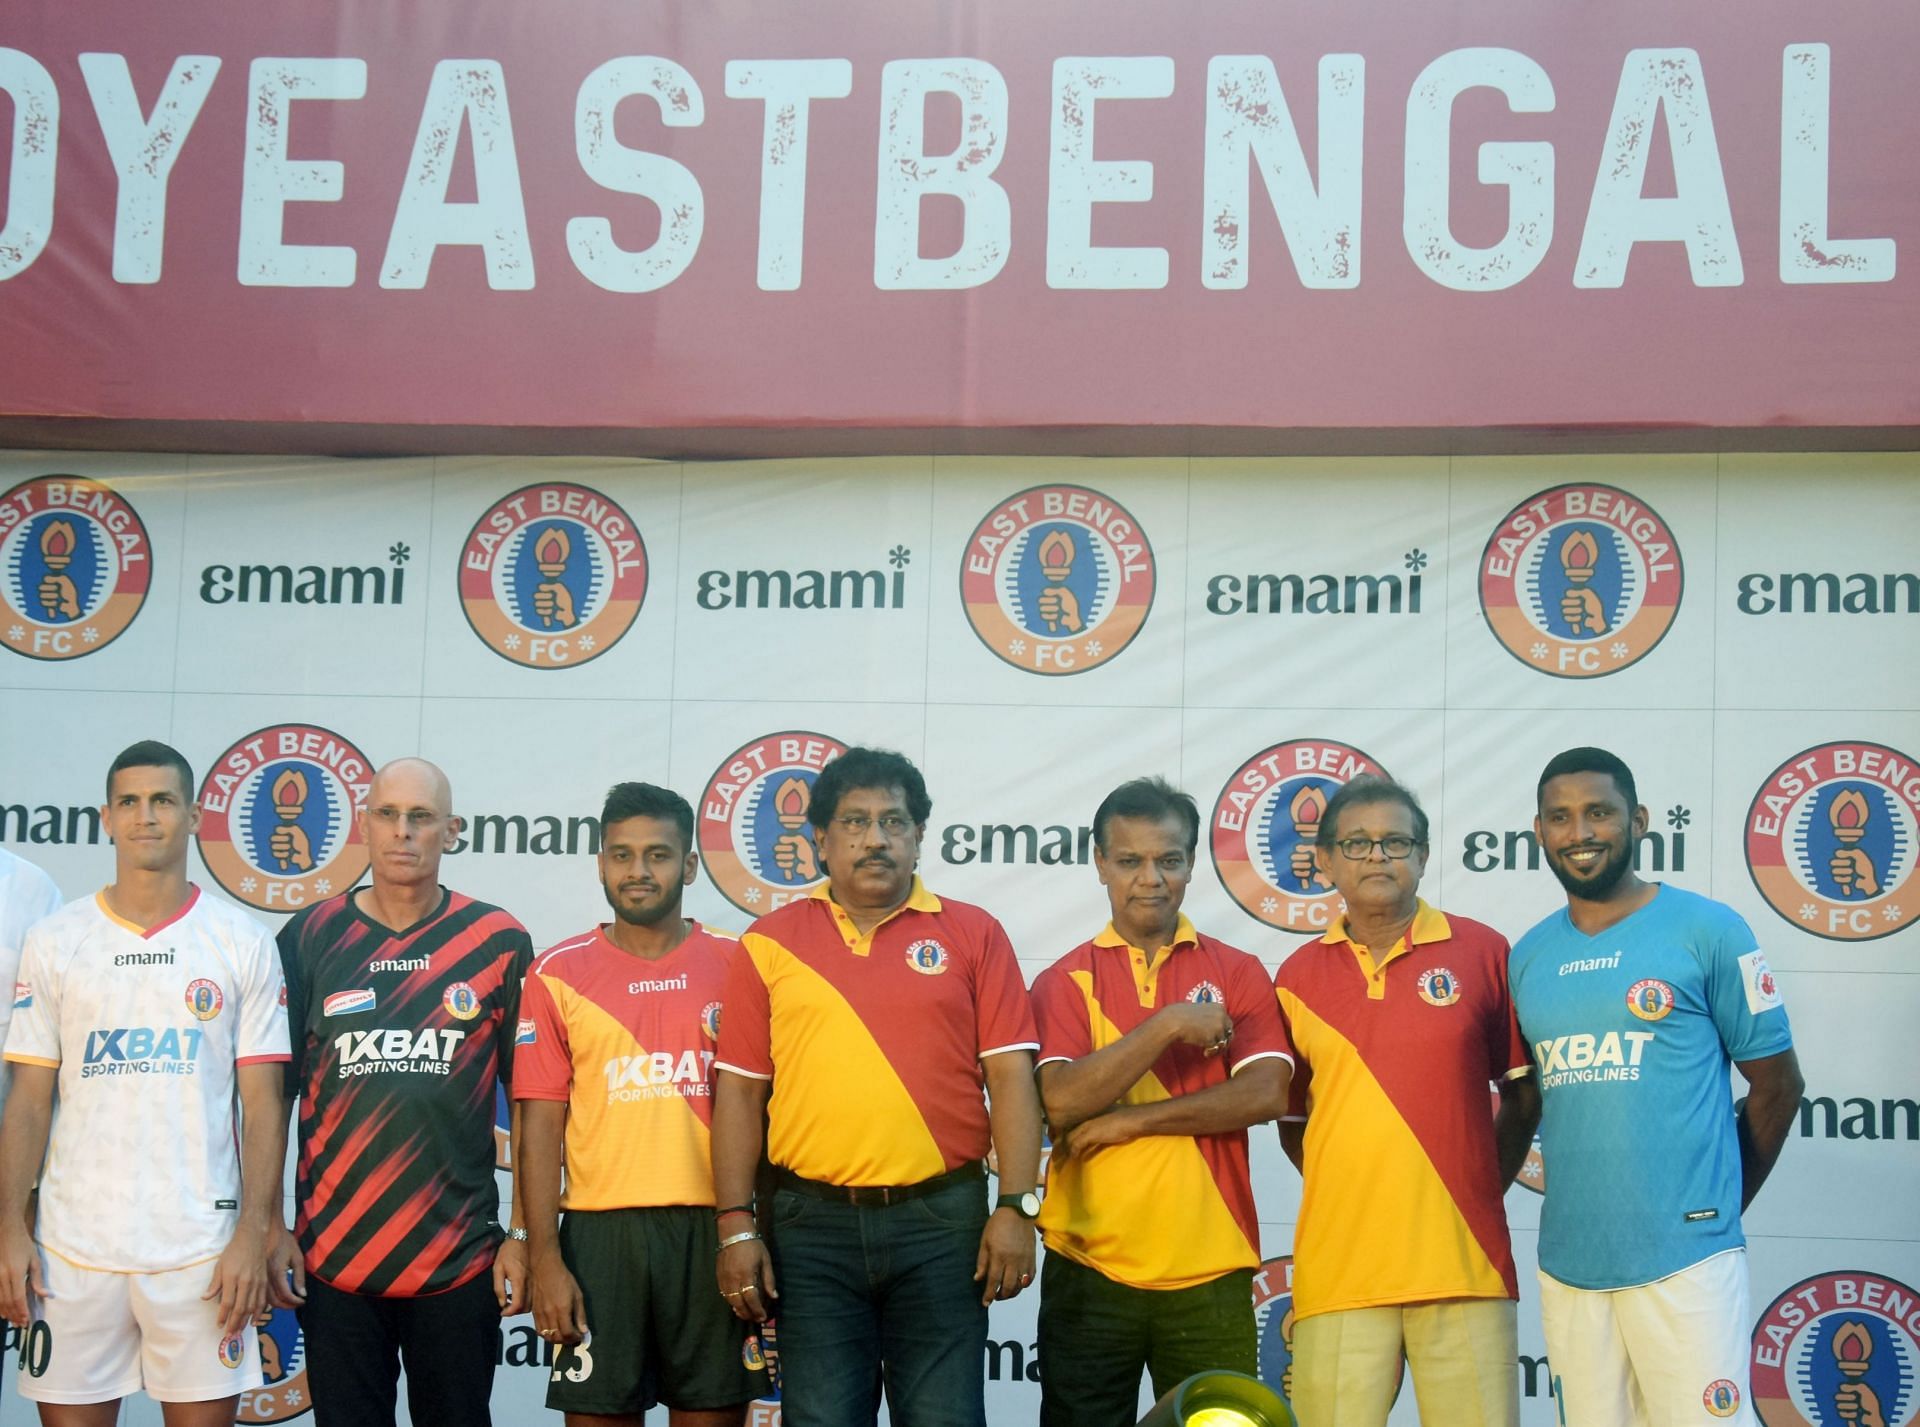 East Bengal FC unveils their new jersey in gala ceremony at Rajdanga